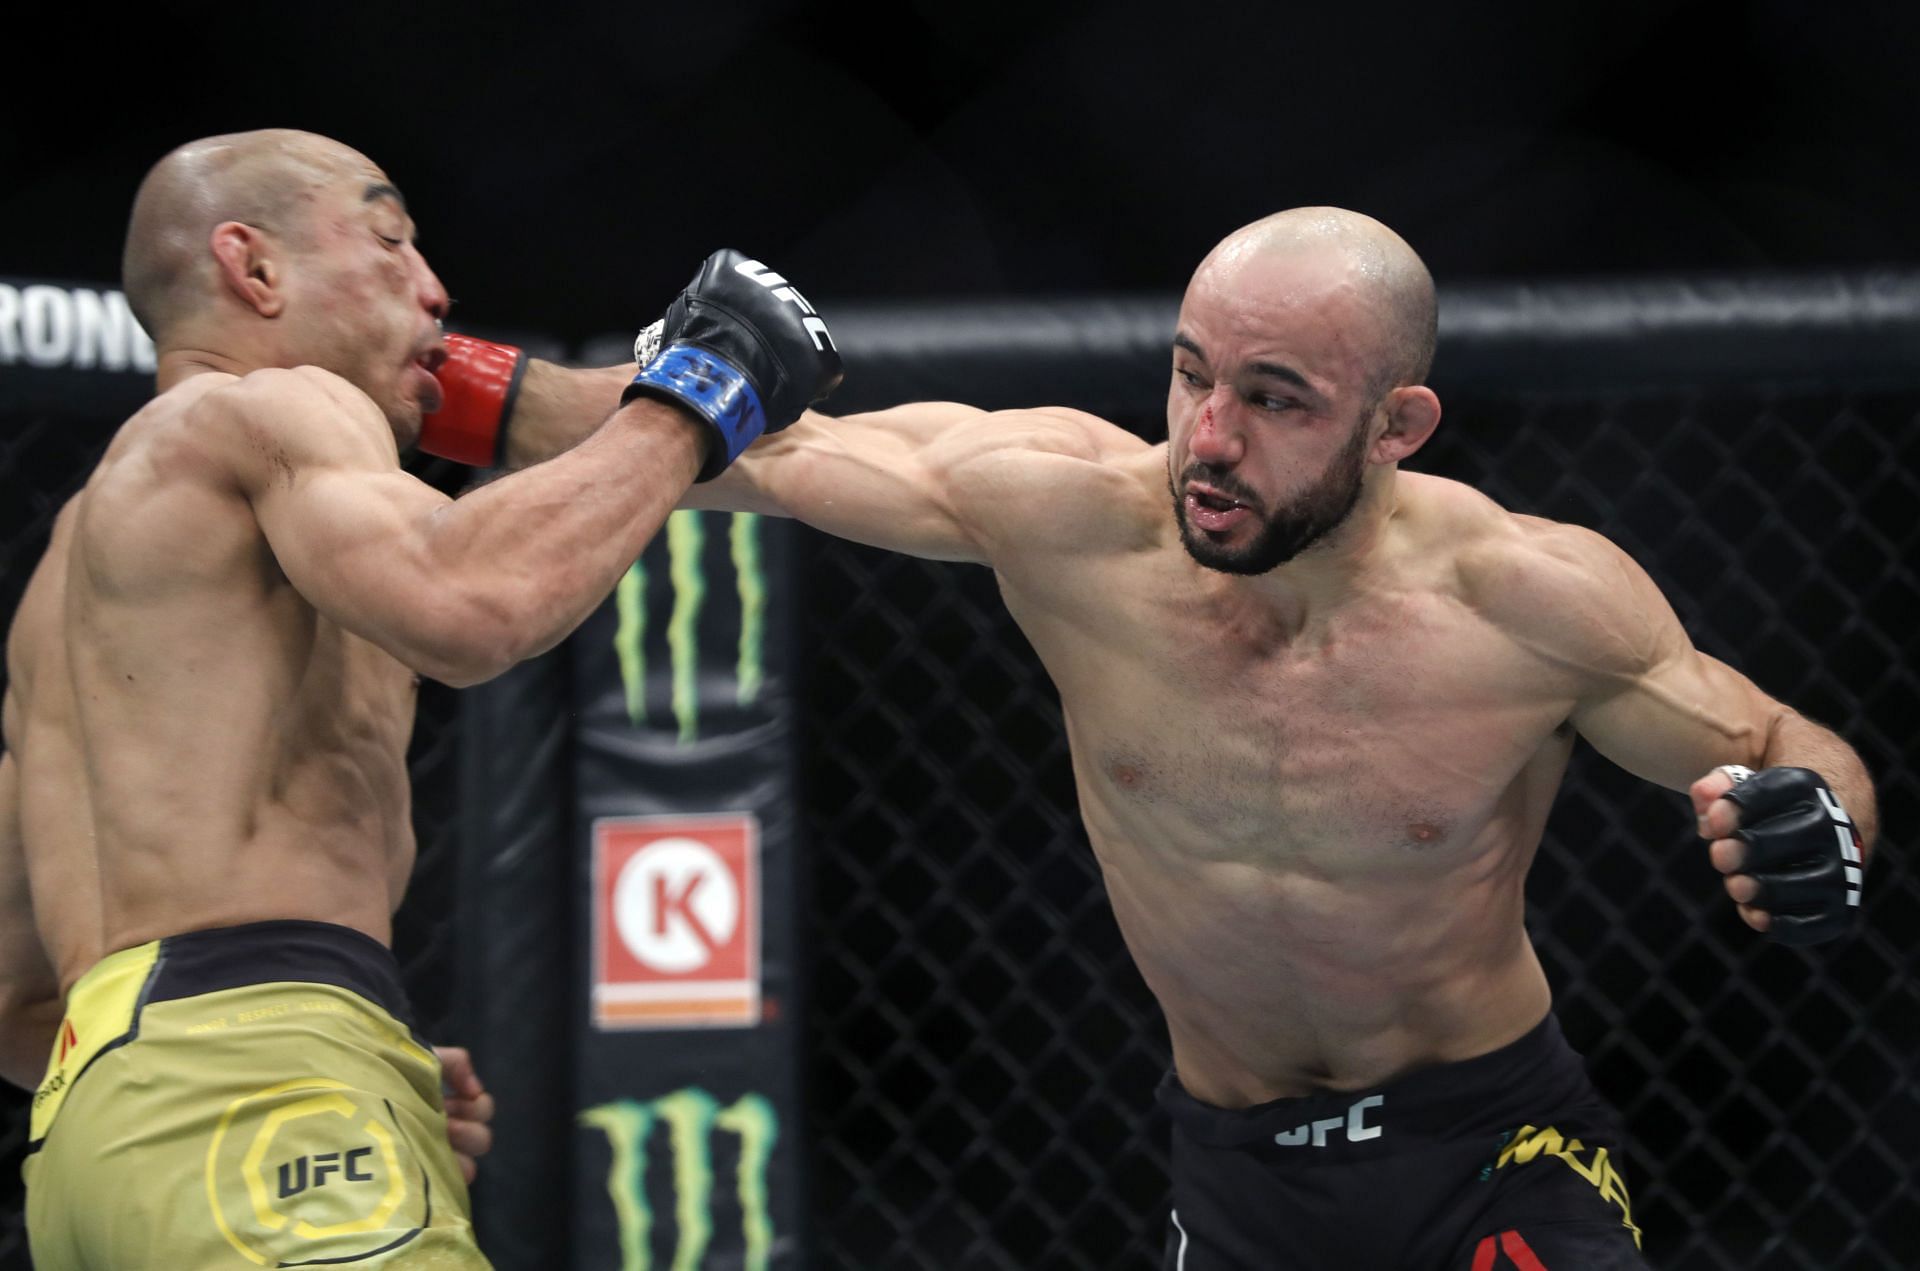 Marlon Moraes may be on the cusp of losing his spot in the UFC